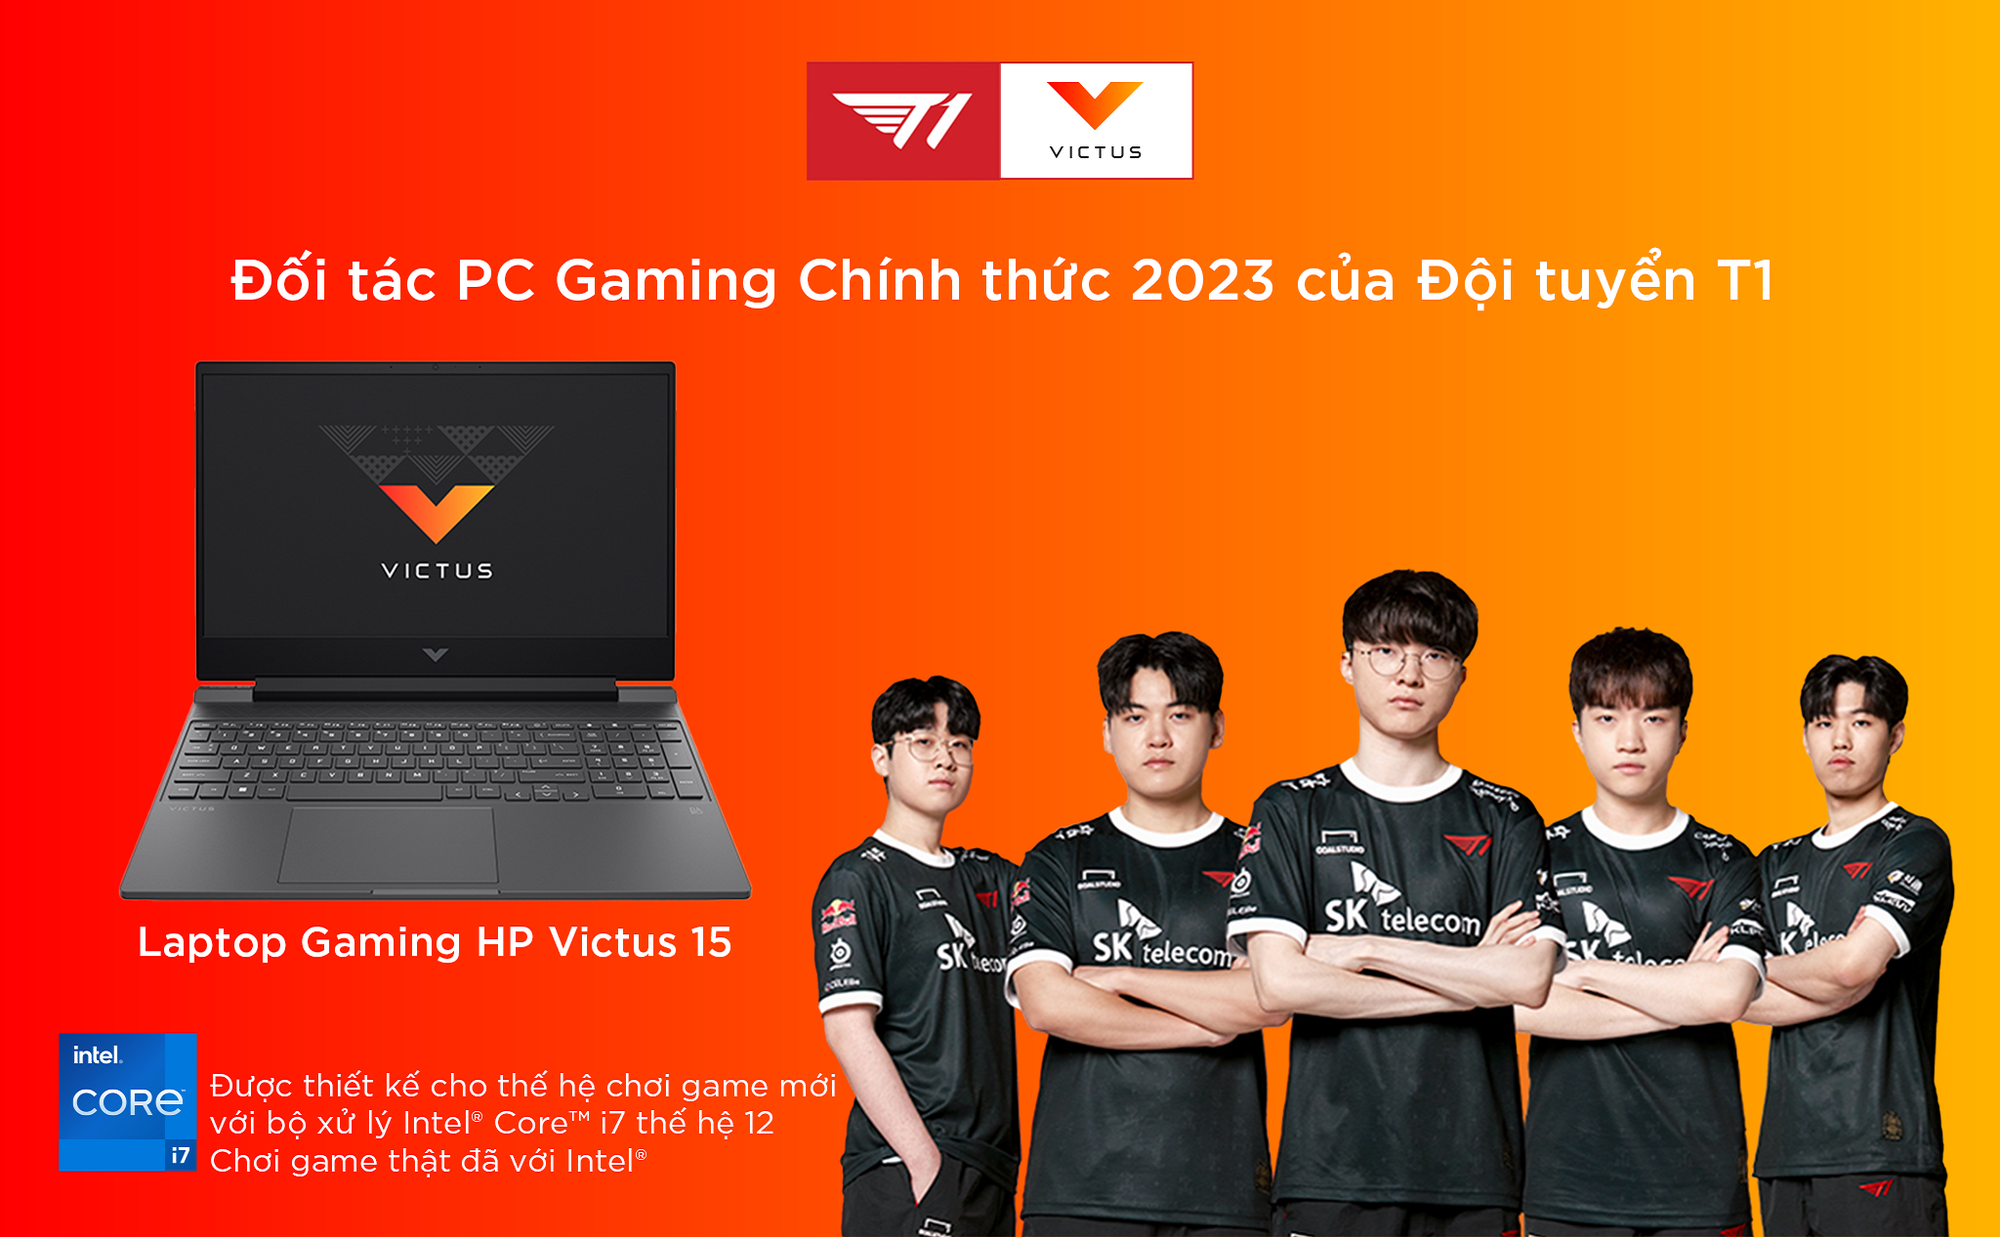 HP Victus is the official 2023 PC gaming partner of the T1 team - Photo 1.